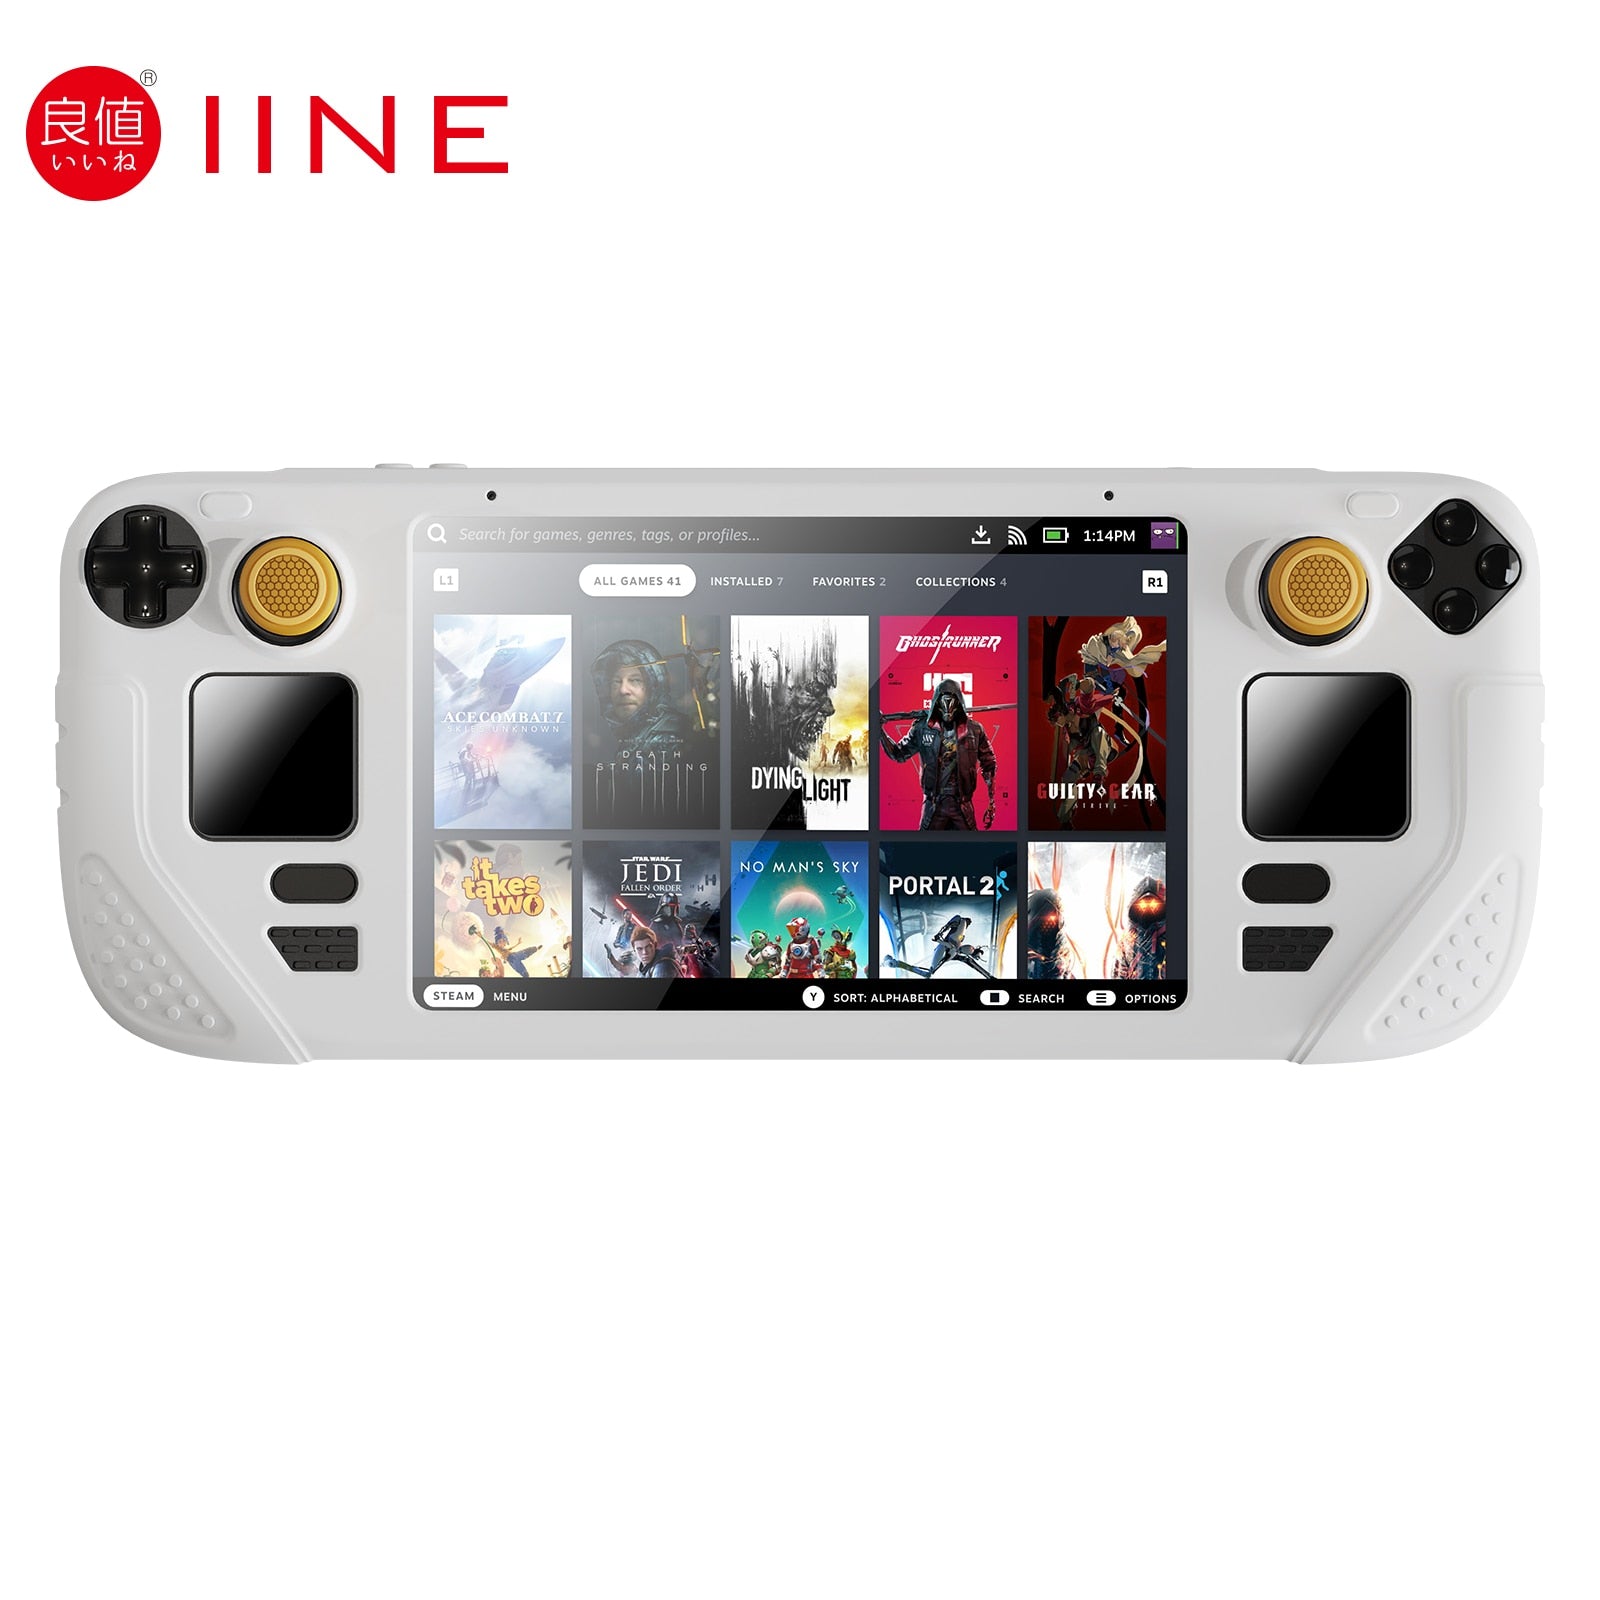 IINE Protective Case 9 in 1 Full Protection Soft Silicone Material Shockproof Case Compatible Steam Deck